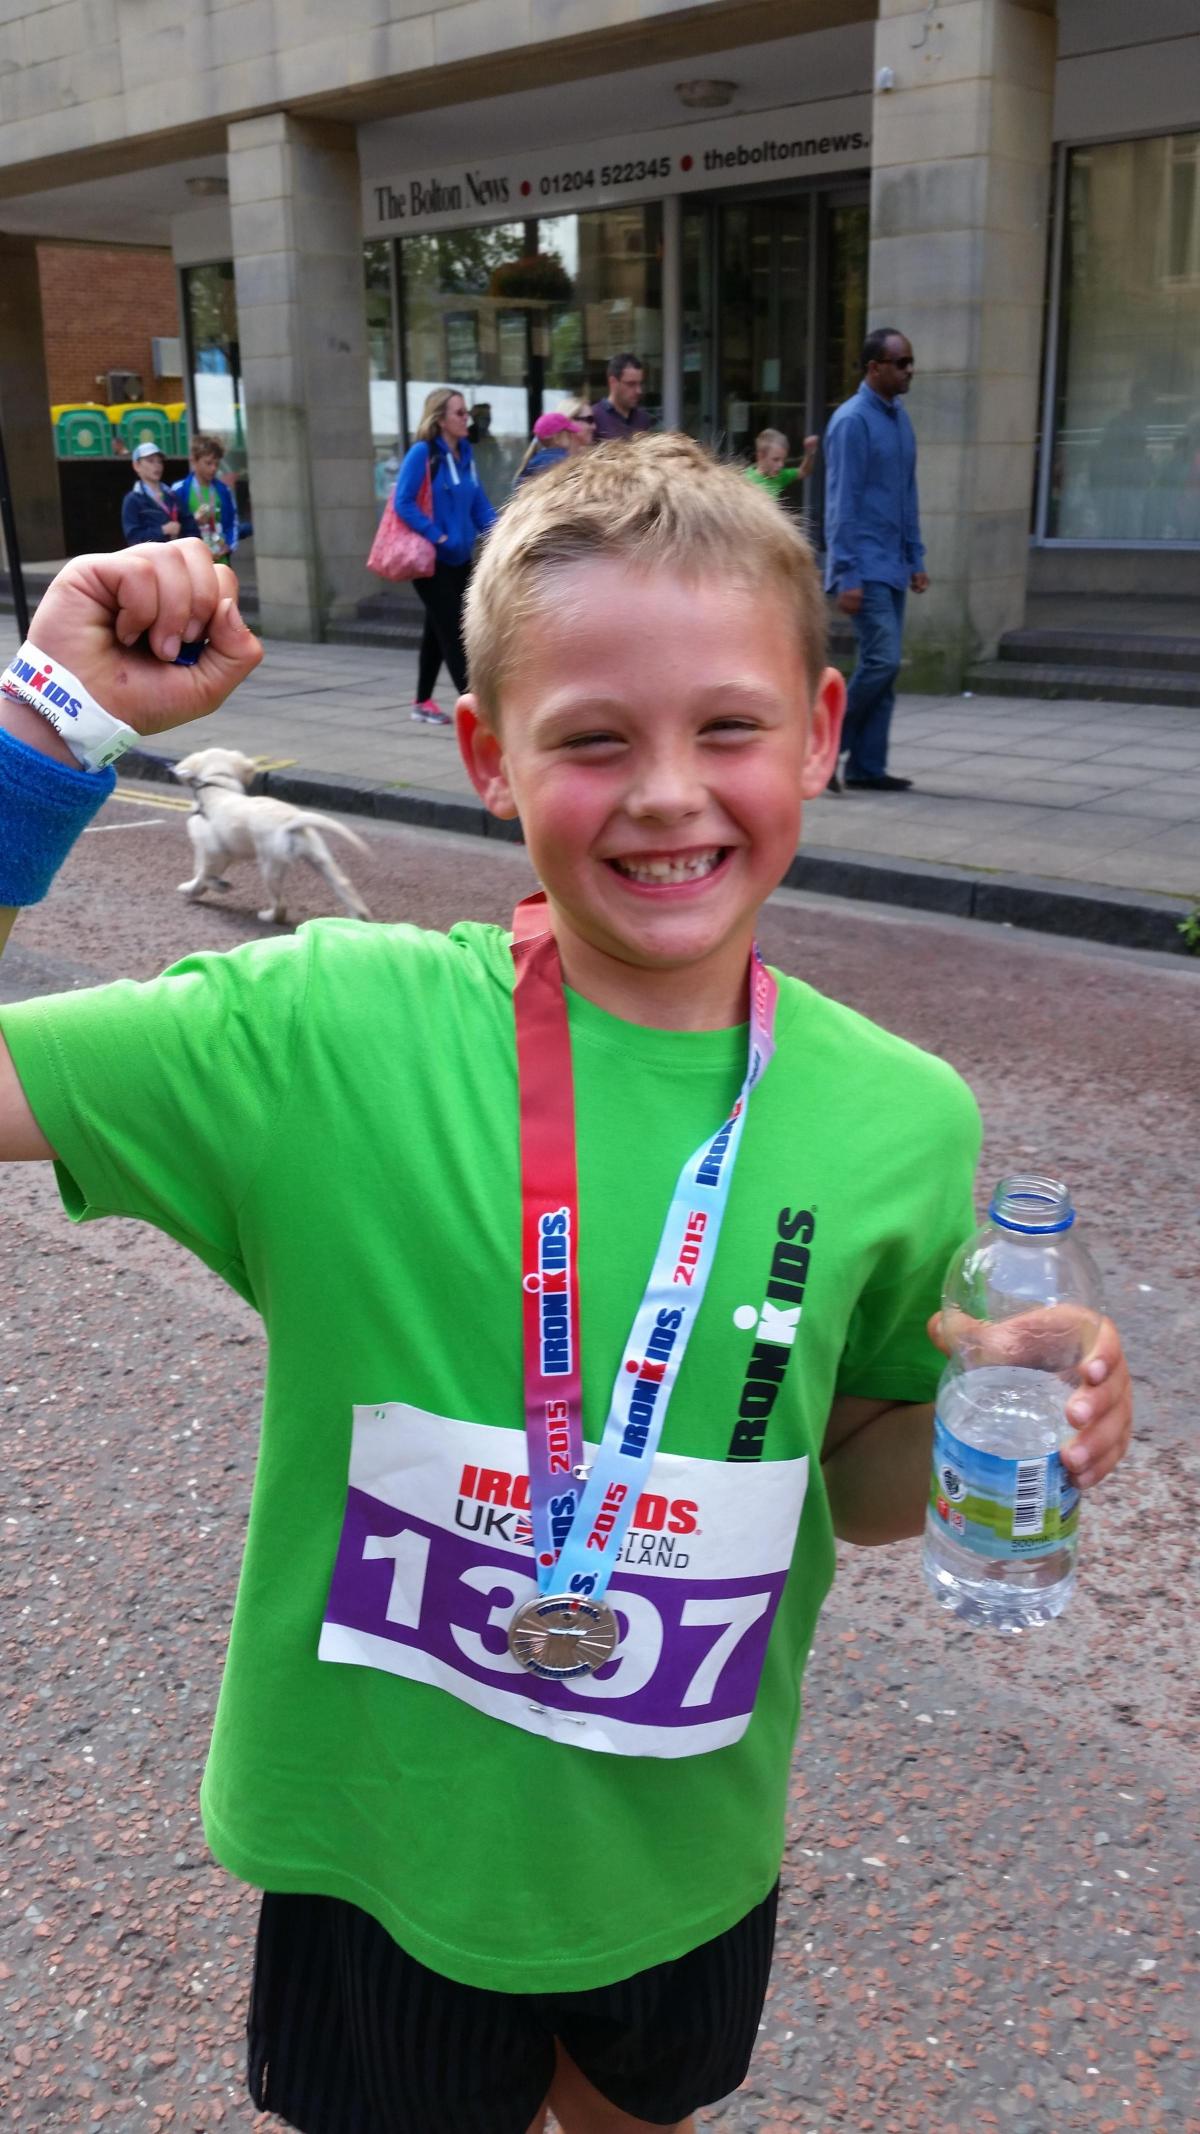 Seven-year-old Thomas Farnell, from Horwich, after competing in his first Ironkids race today.